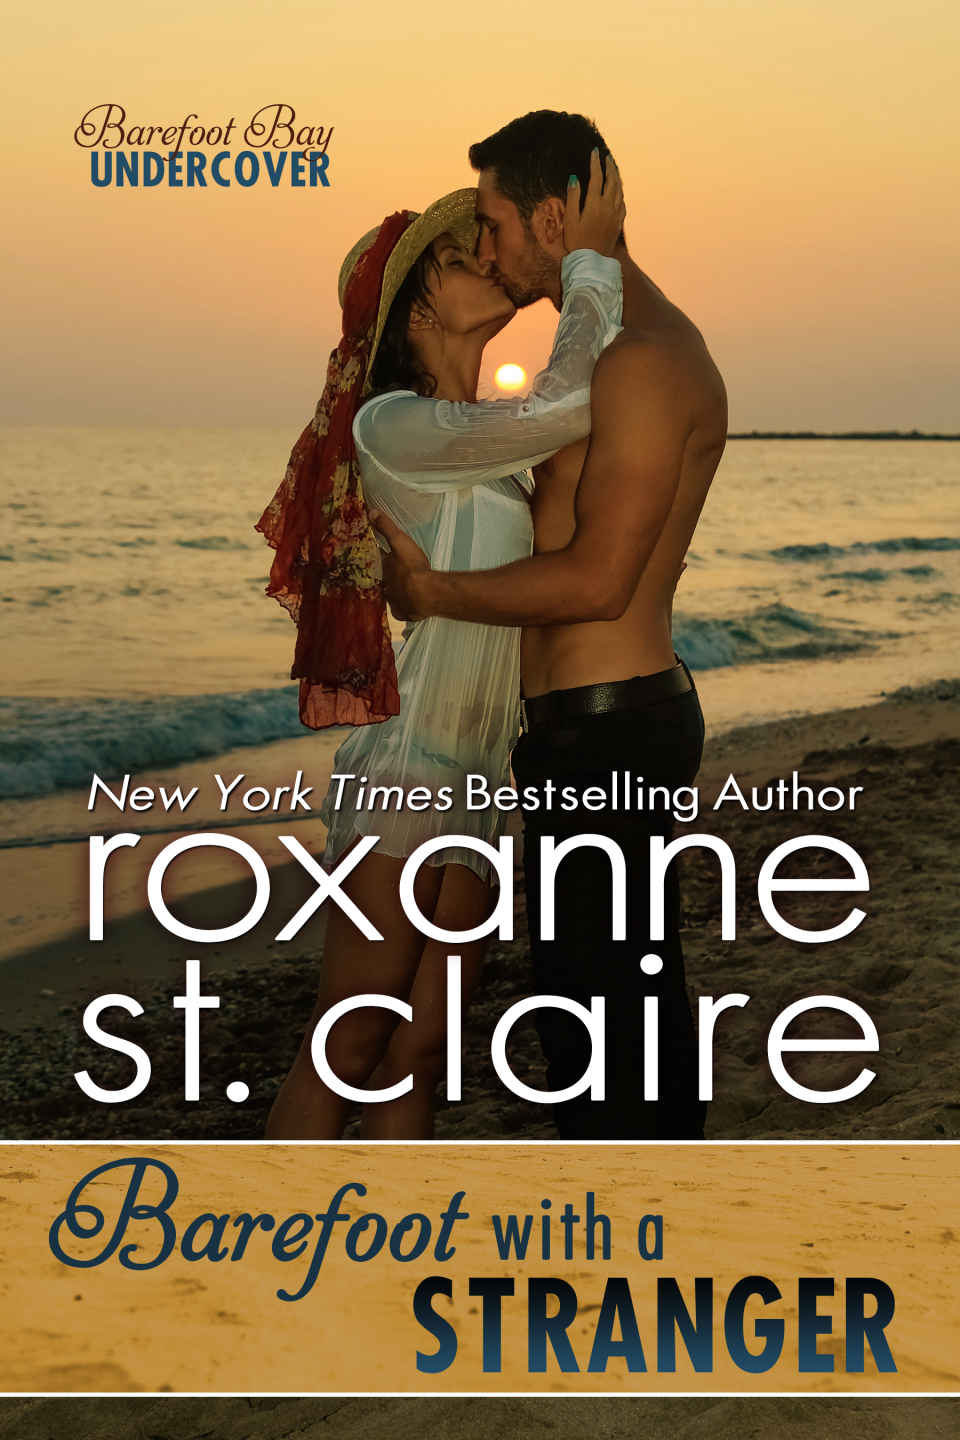 Barefoot With a Stranger (Barefoot Bay Undercover Book 2) by Roxanne St. Claire